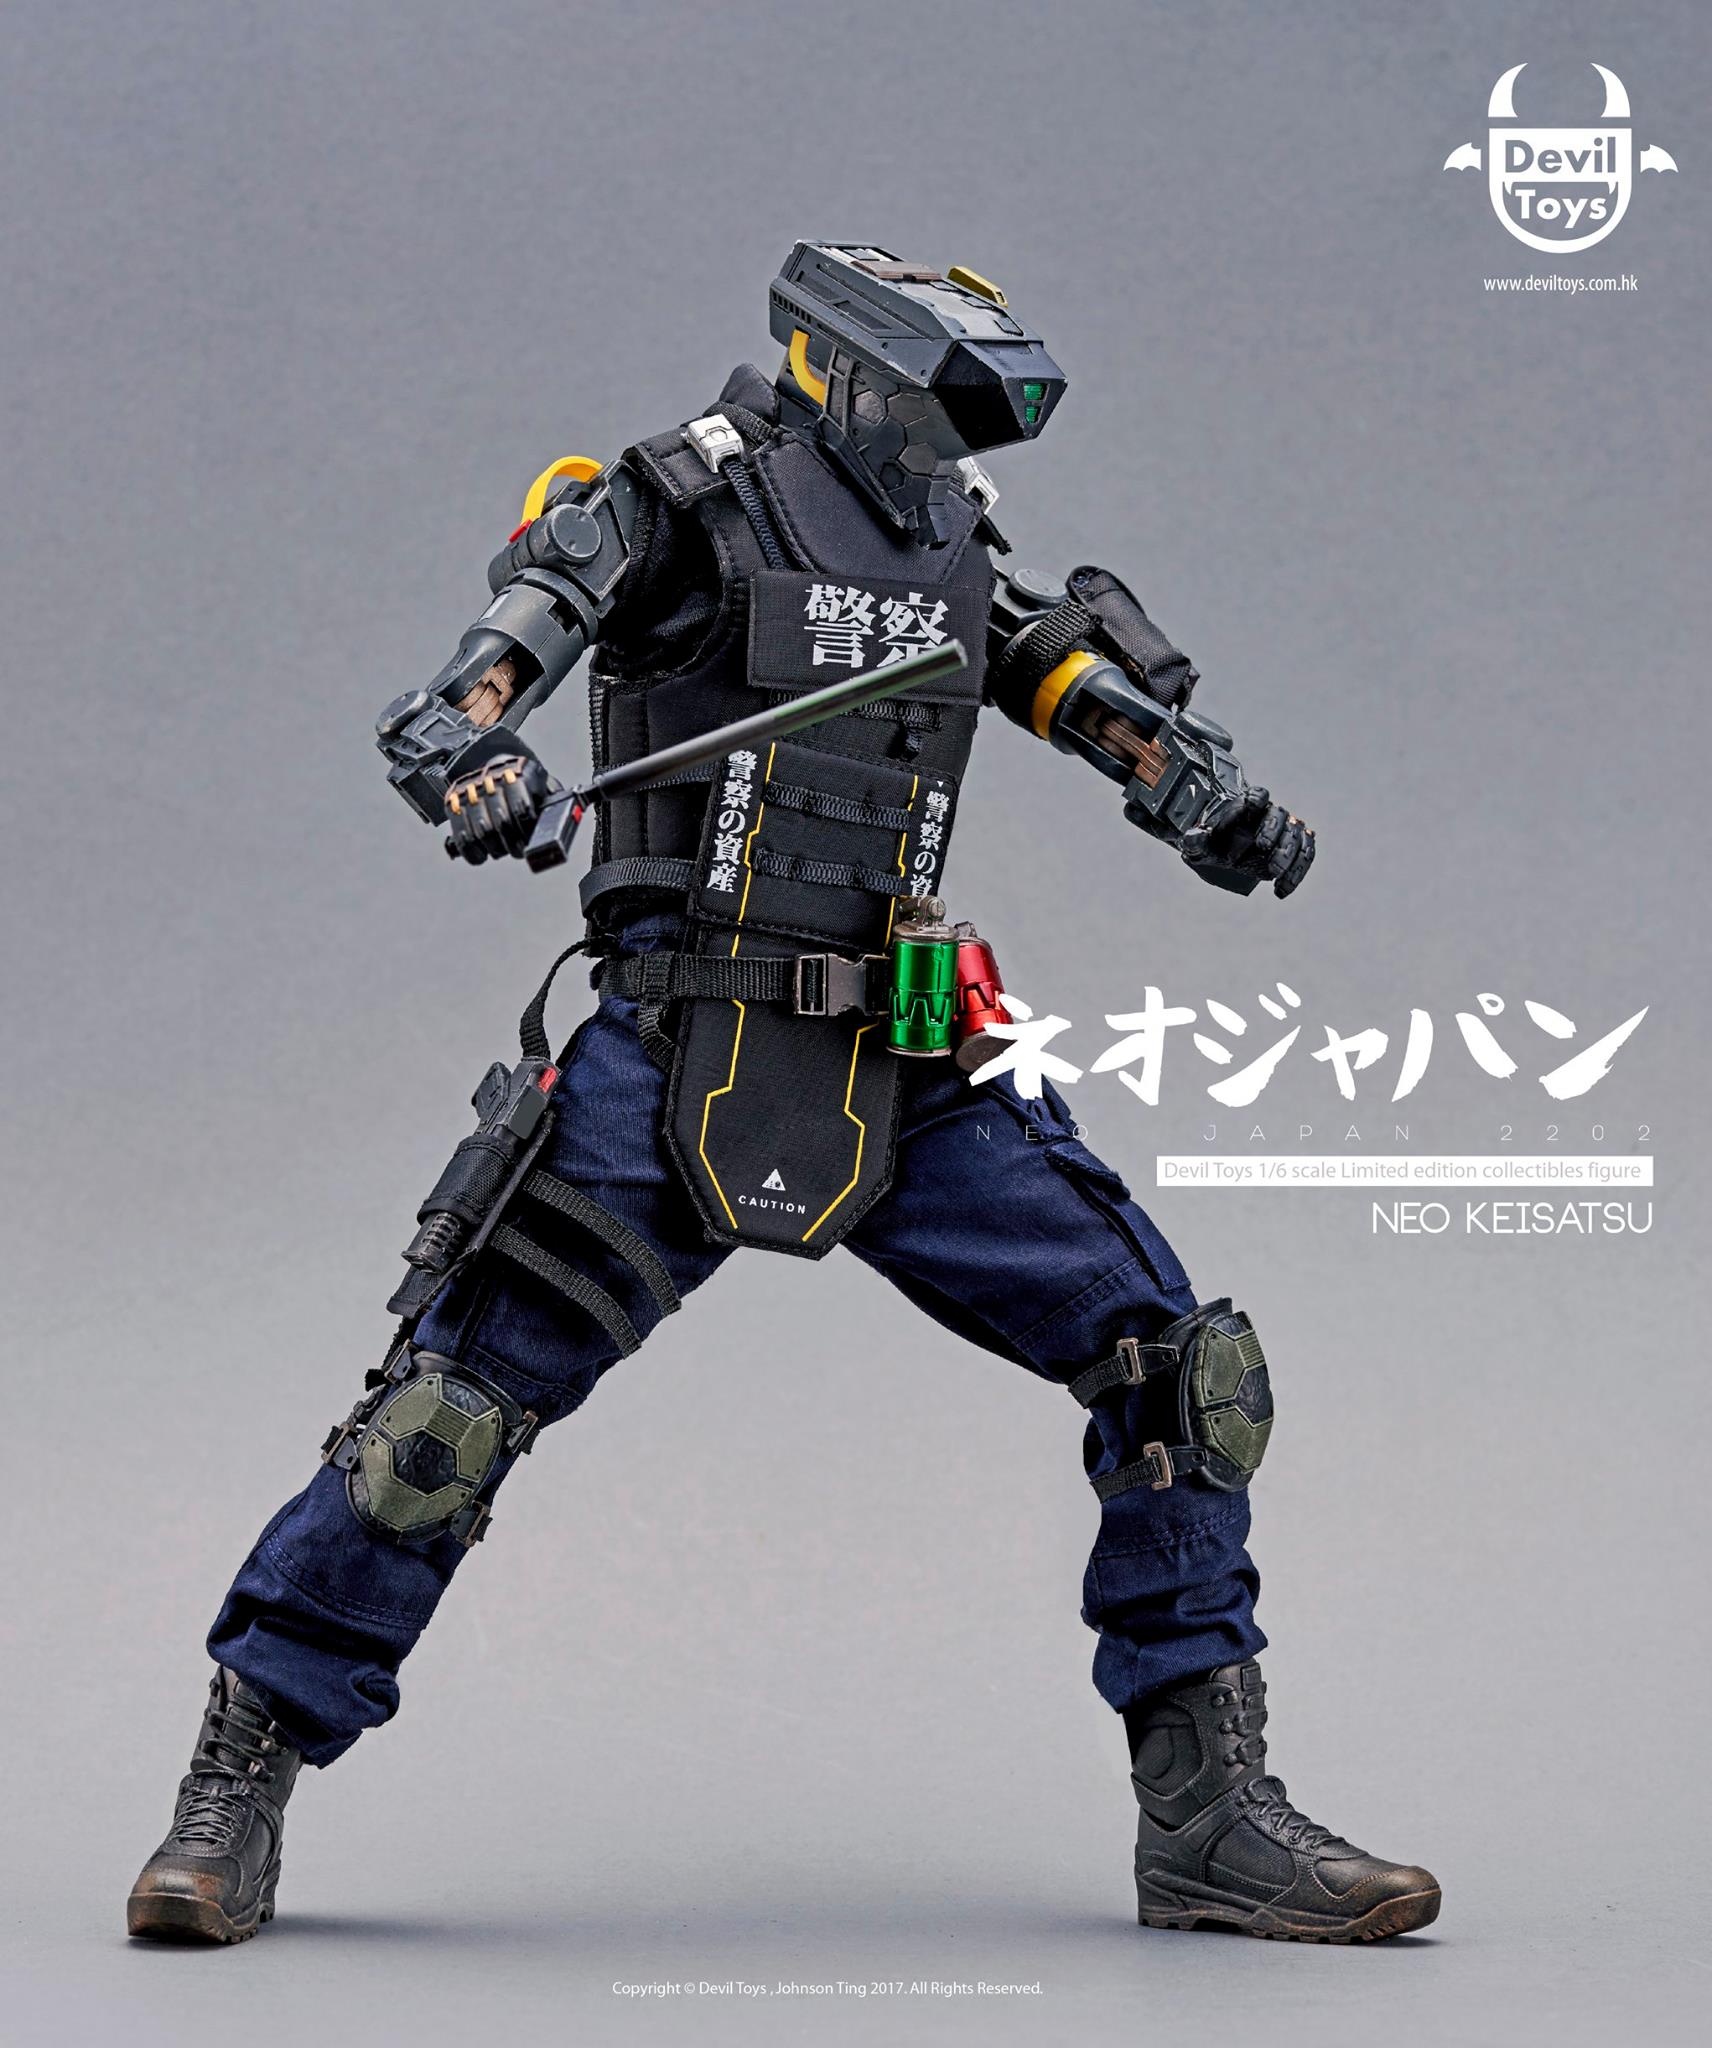 Artist’s Cyberpunk Project Gets Turned Into An Action Figure